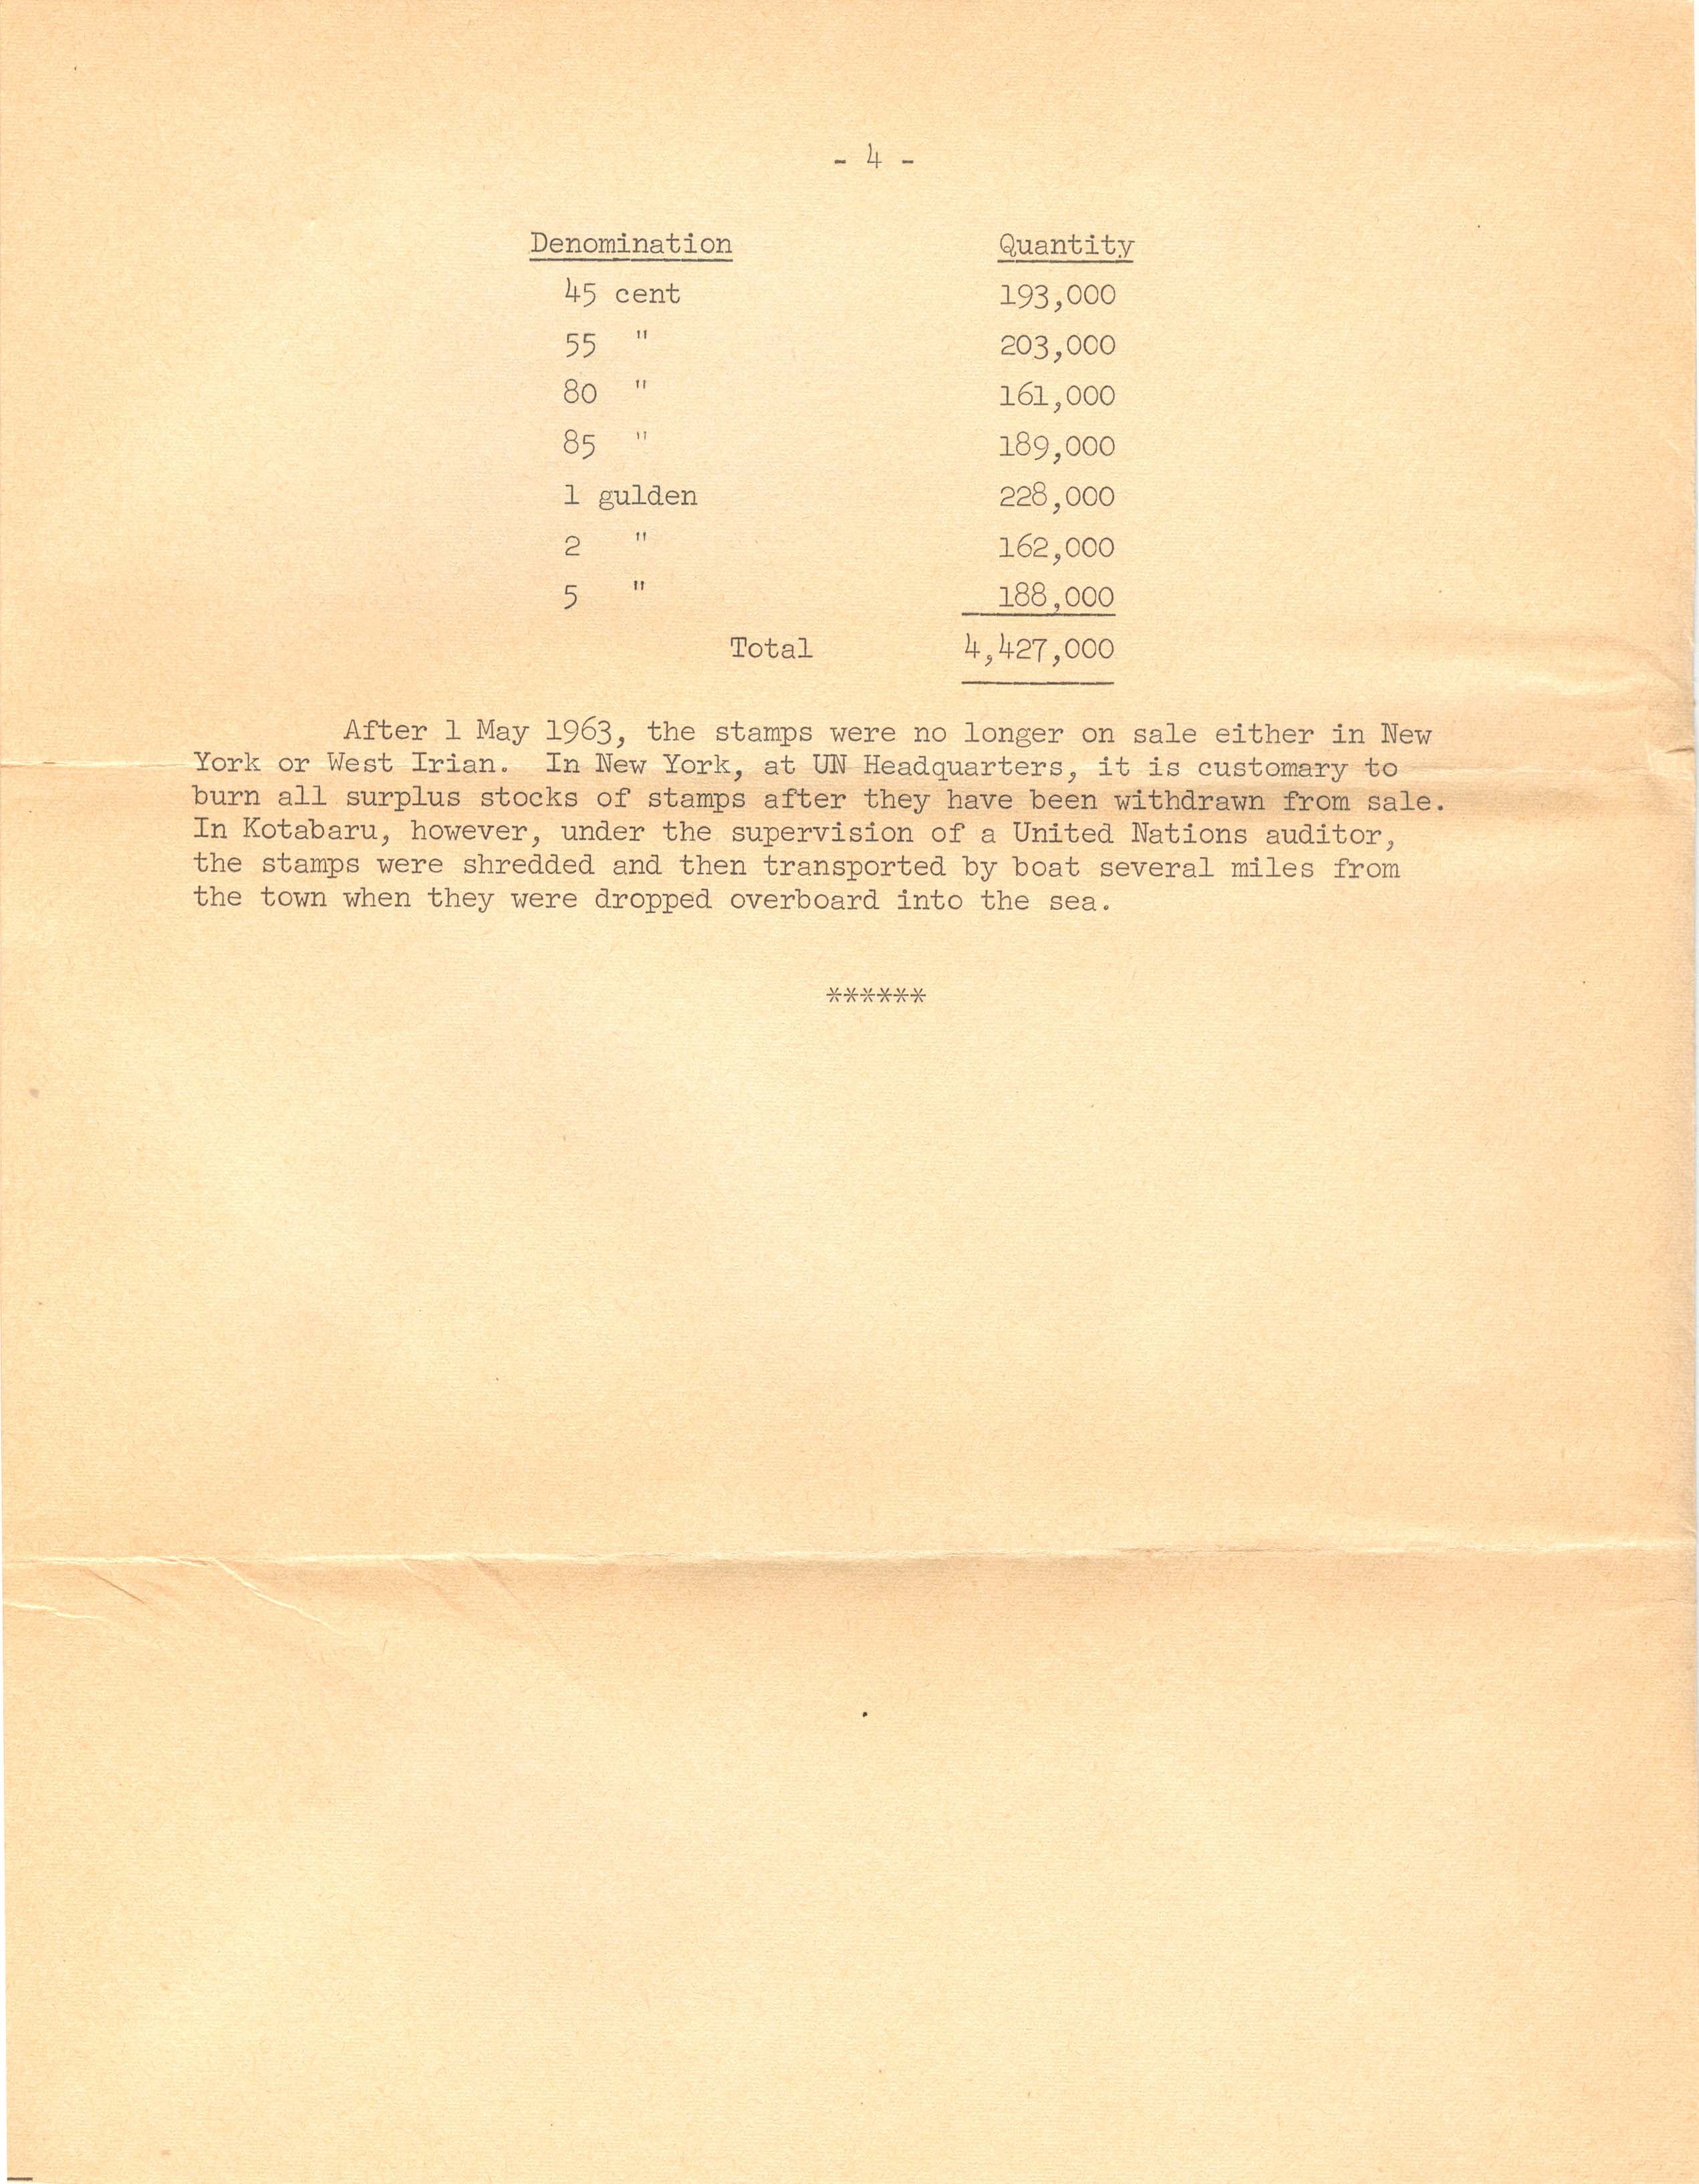 Third Class mail contents - page 4